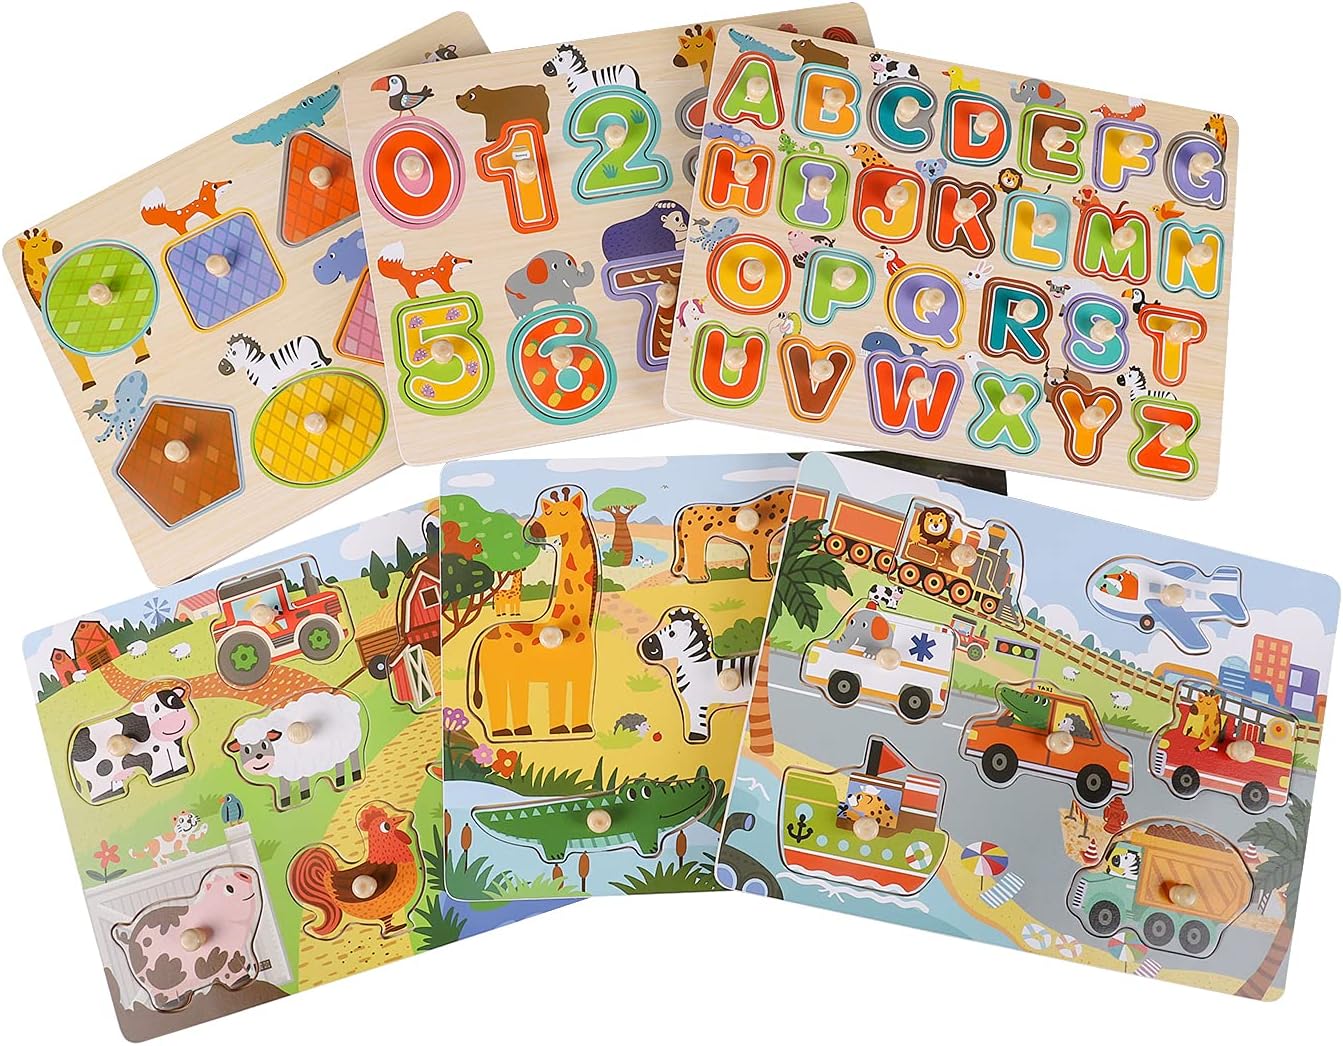 6 Pack Wooden Peg Puzzles for Toddler Alphabet Numbers Animals Educational Learning Toys Wooden Puzzles for Toddlers Kids Ages 1-3 Years Old Boys Girls Gift